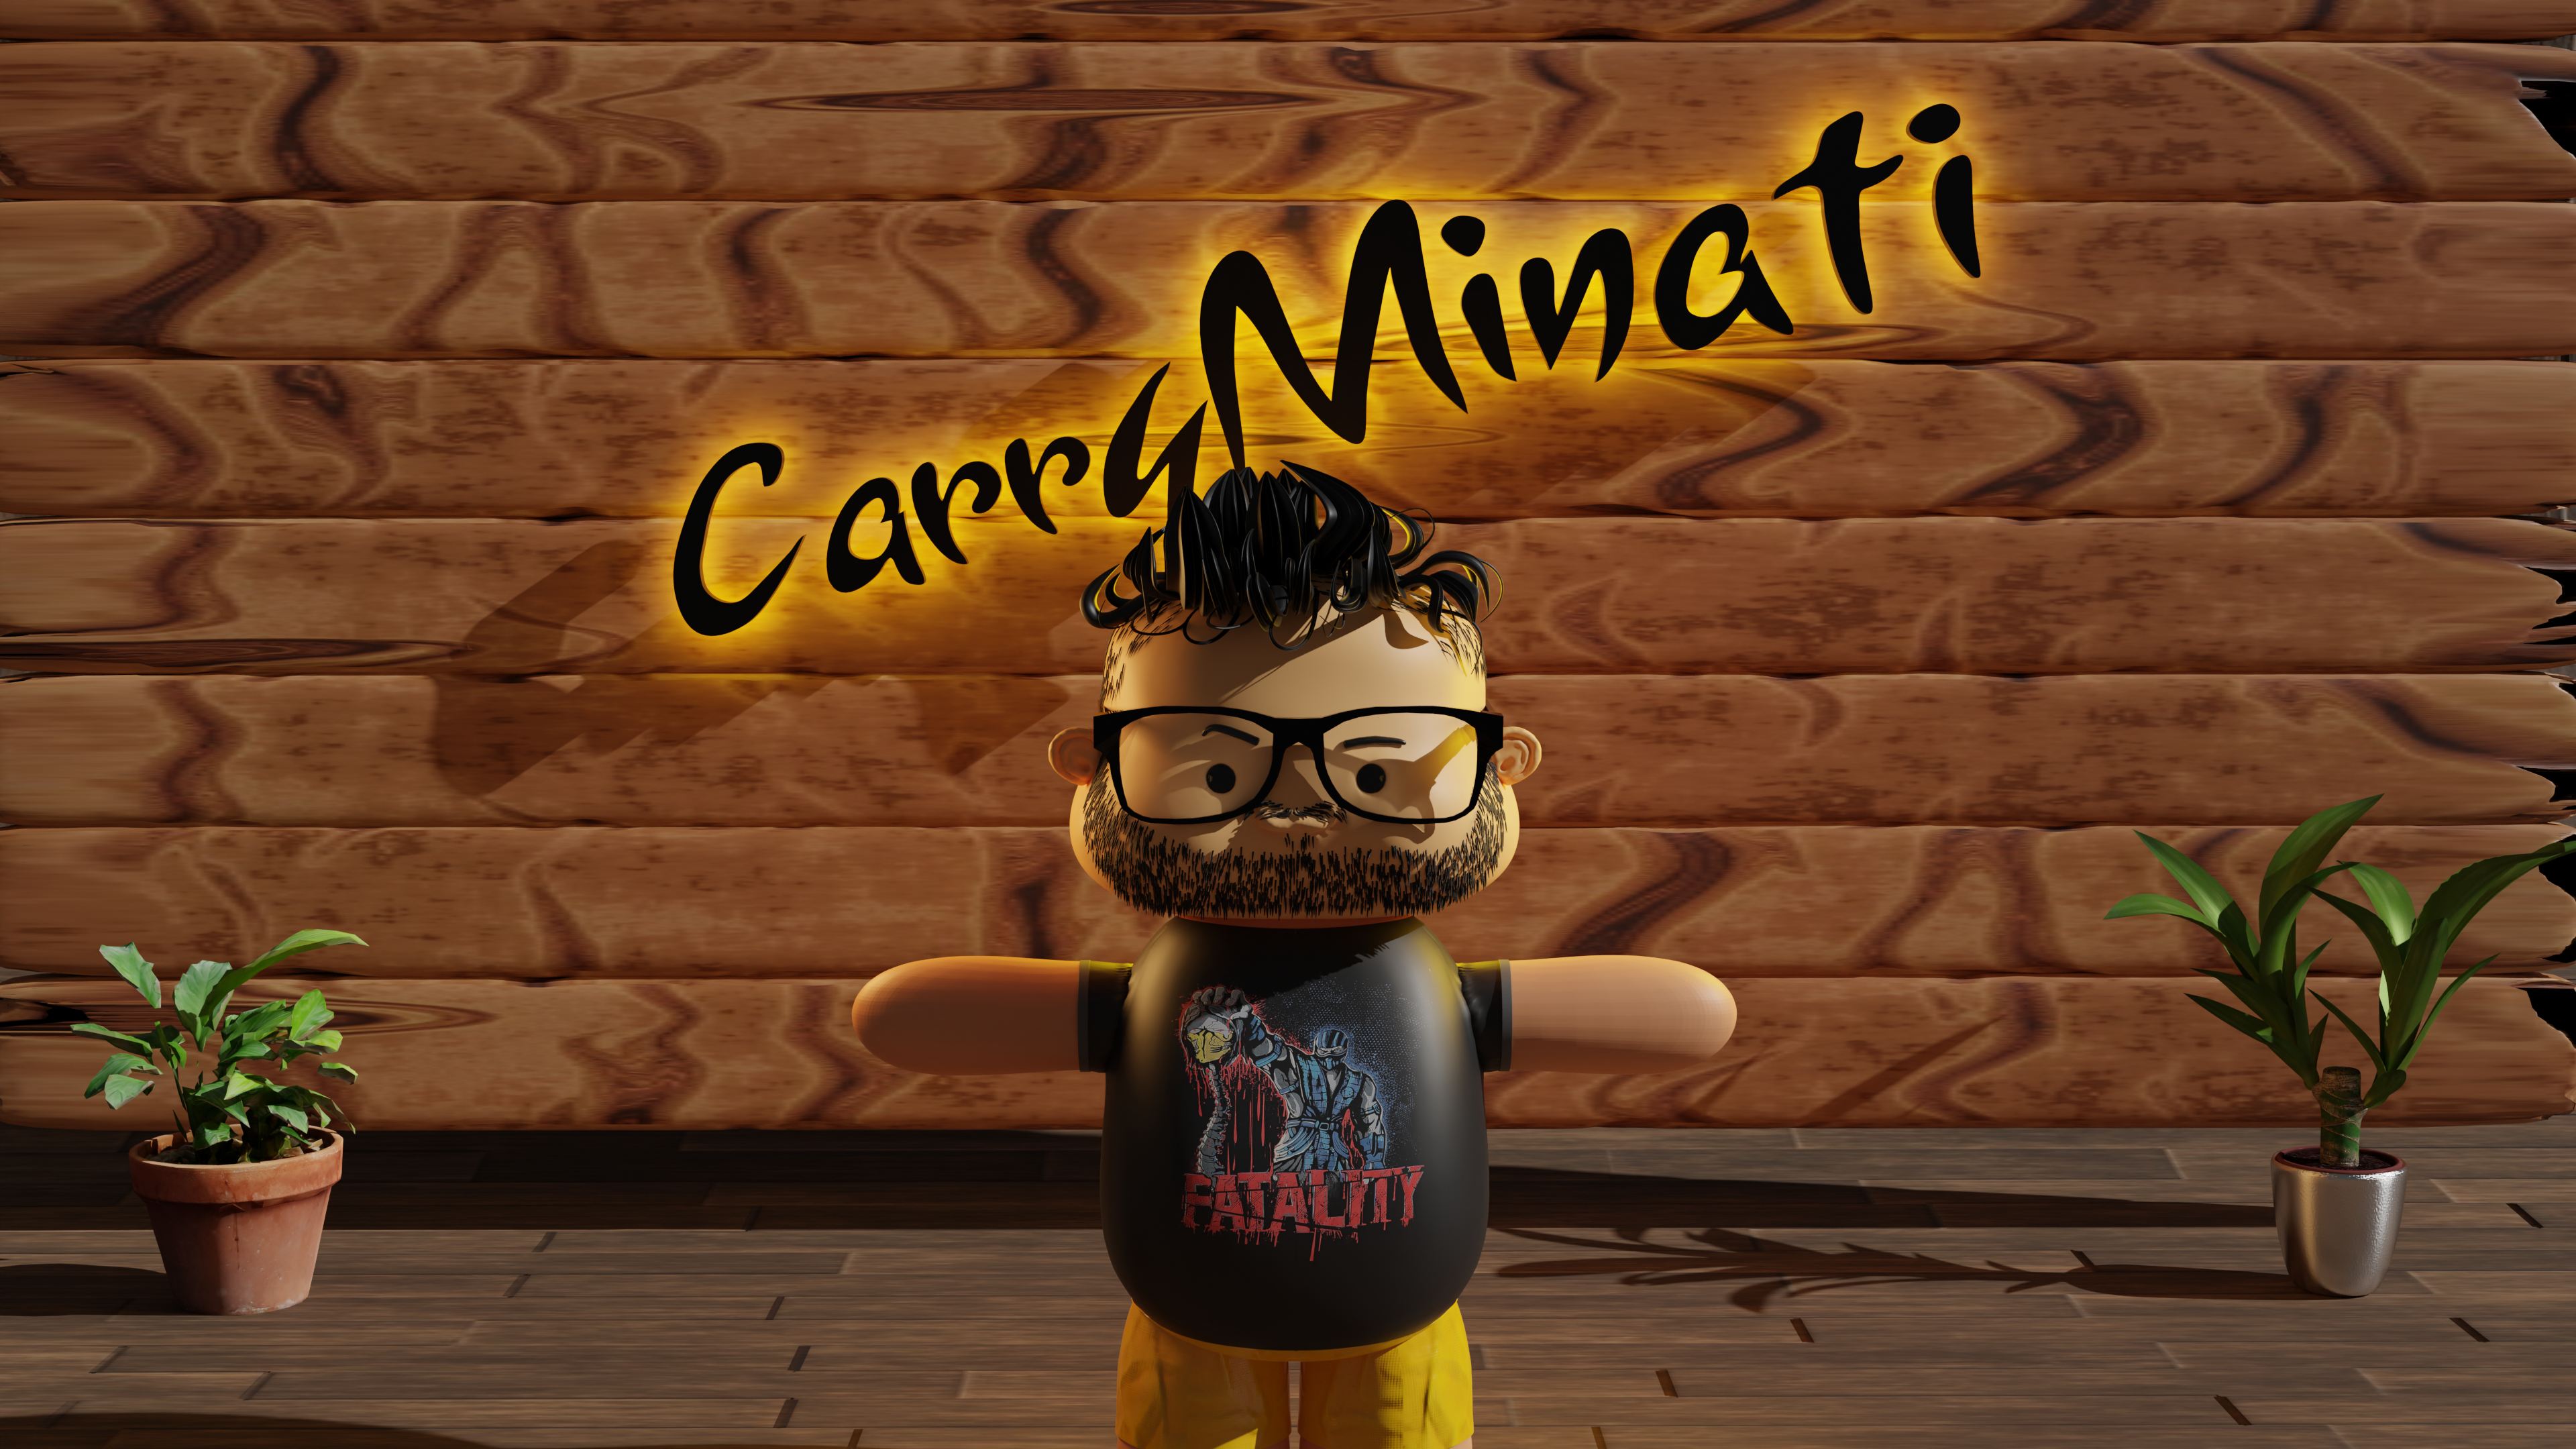 CarryMinati NFT 3D Model - Untitled Collection #240063756 | OpenSea